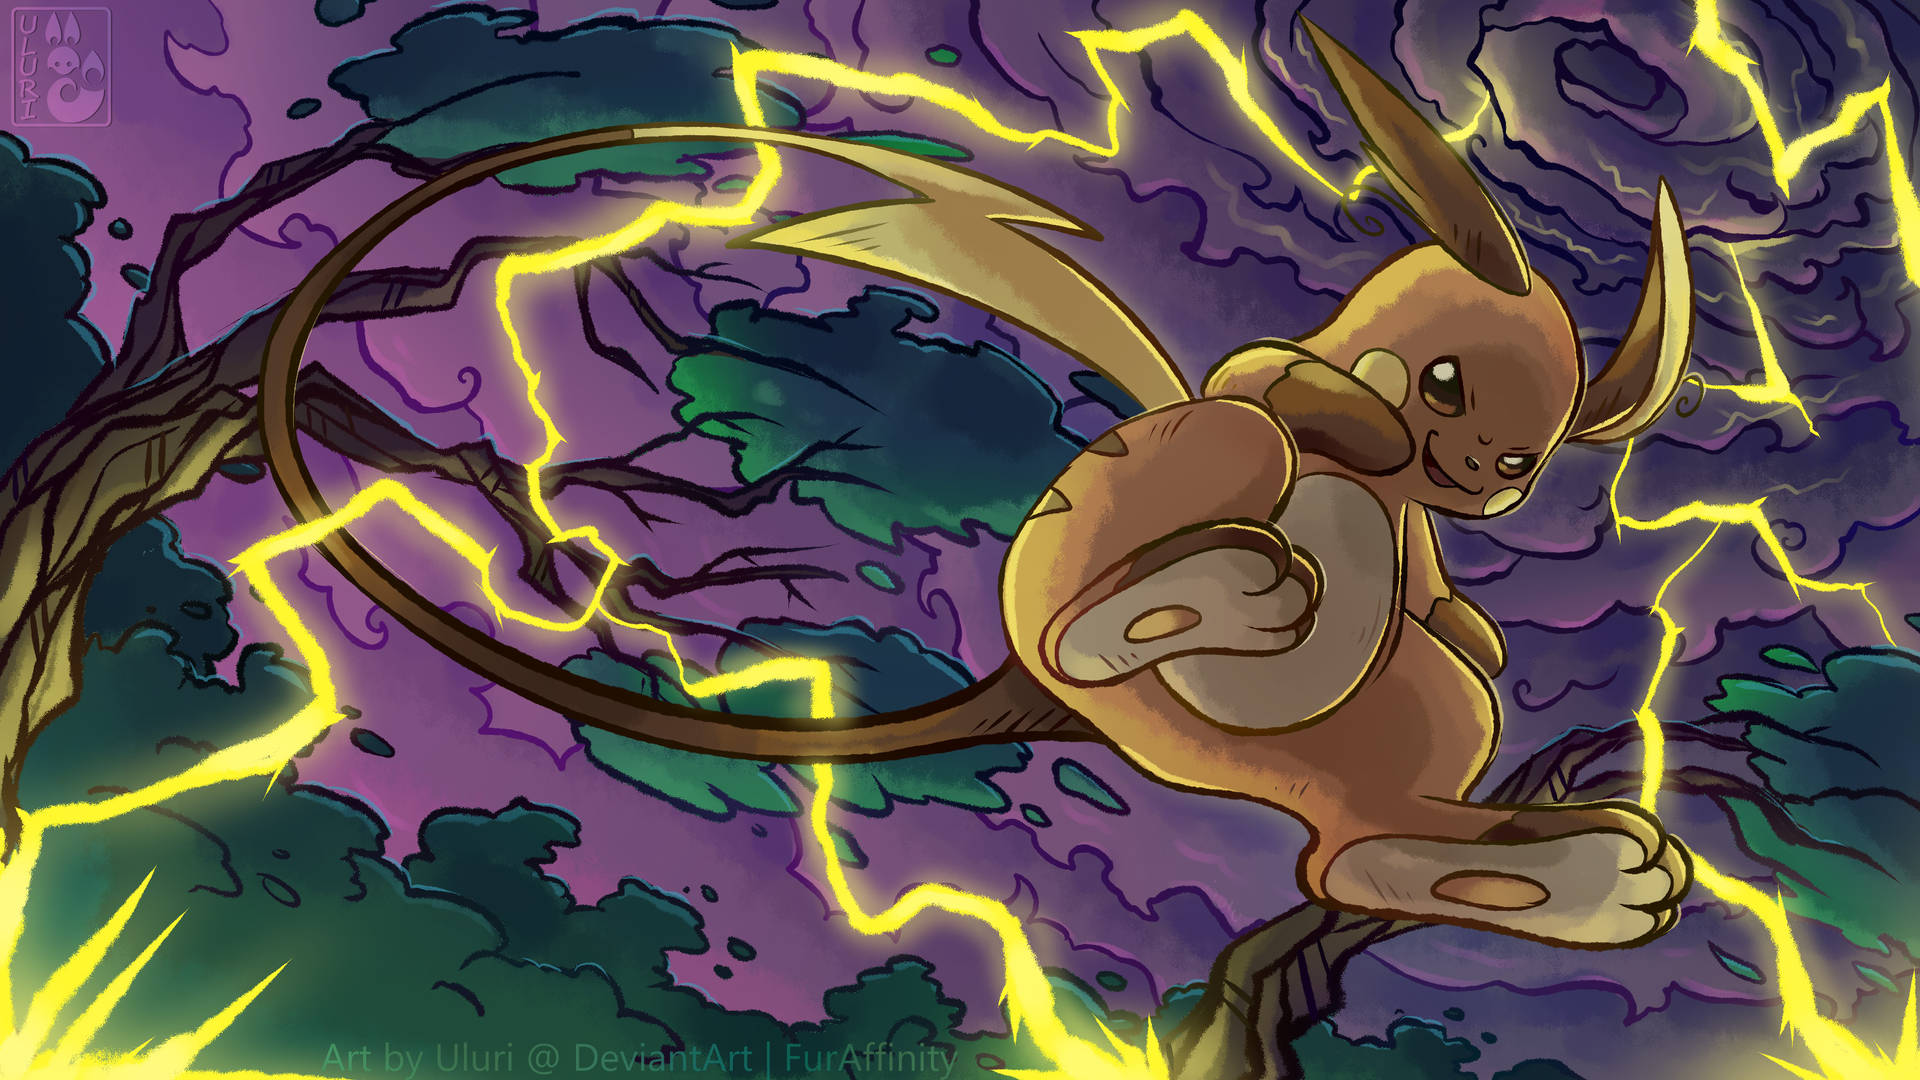 Illuminated By The Thunder, Raichu Readies For A Fight Background